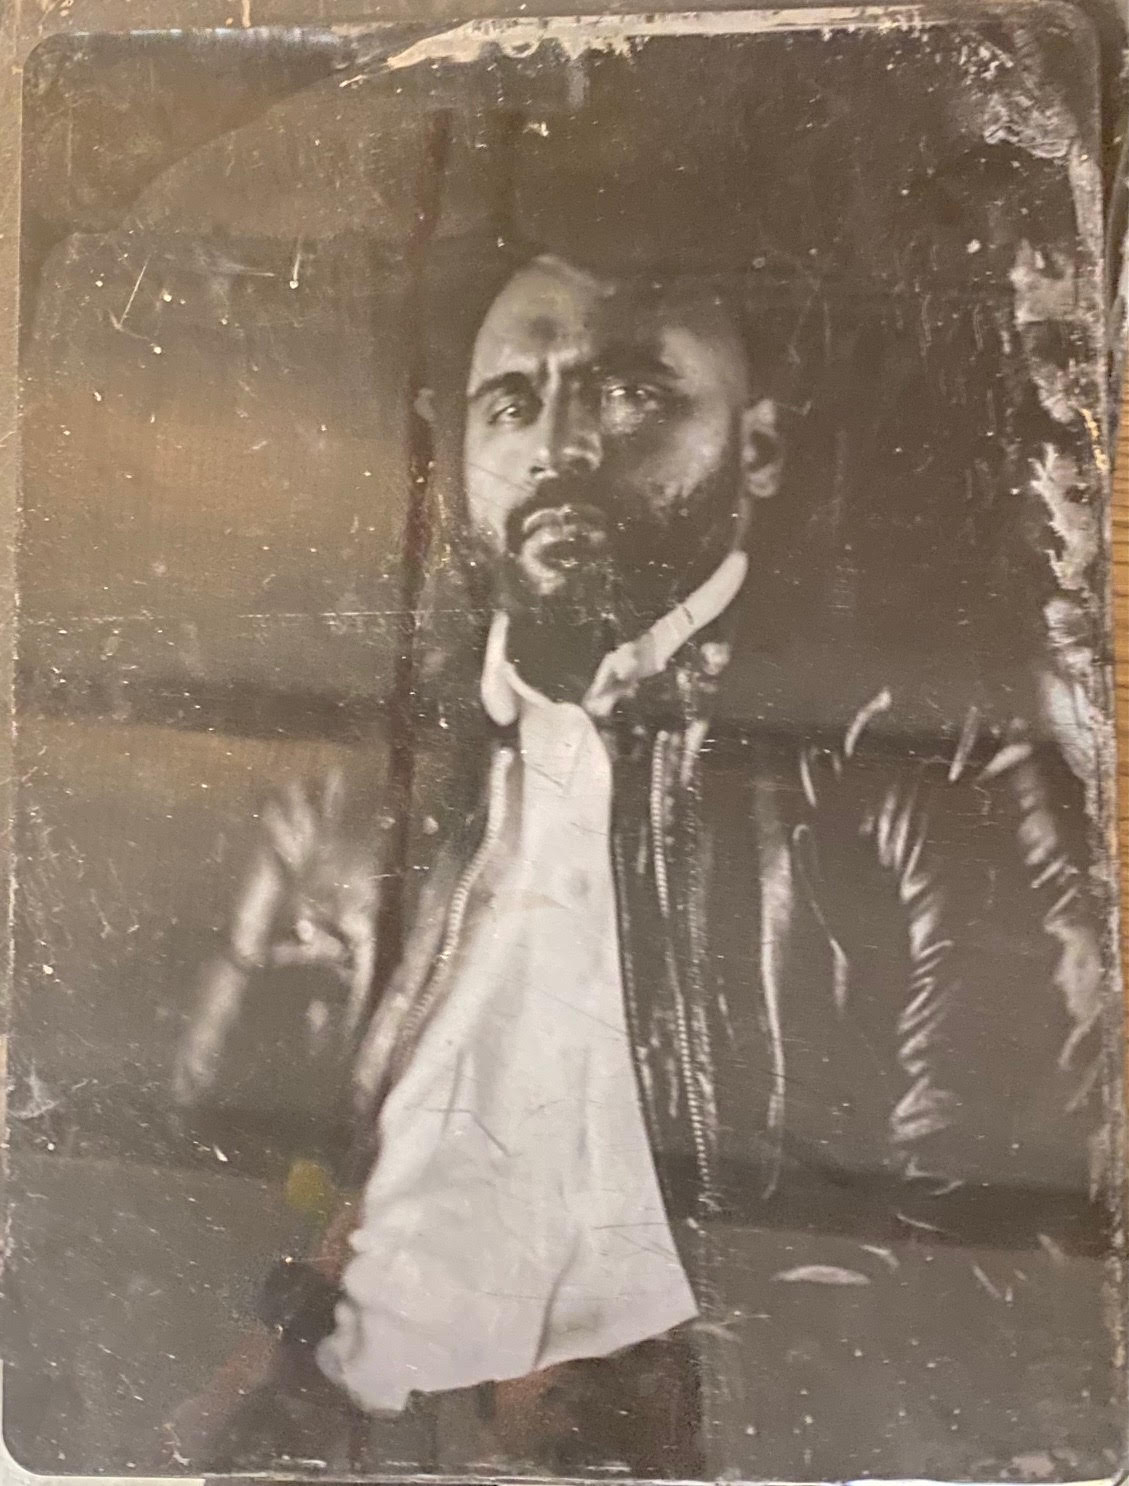 Portrait using wet plate collodion., Paused Mirror: The Saudi Artists by Osama Esid 